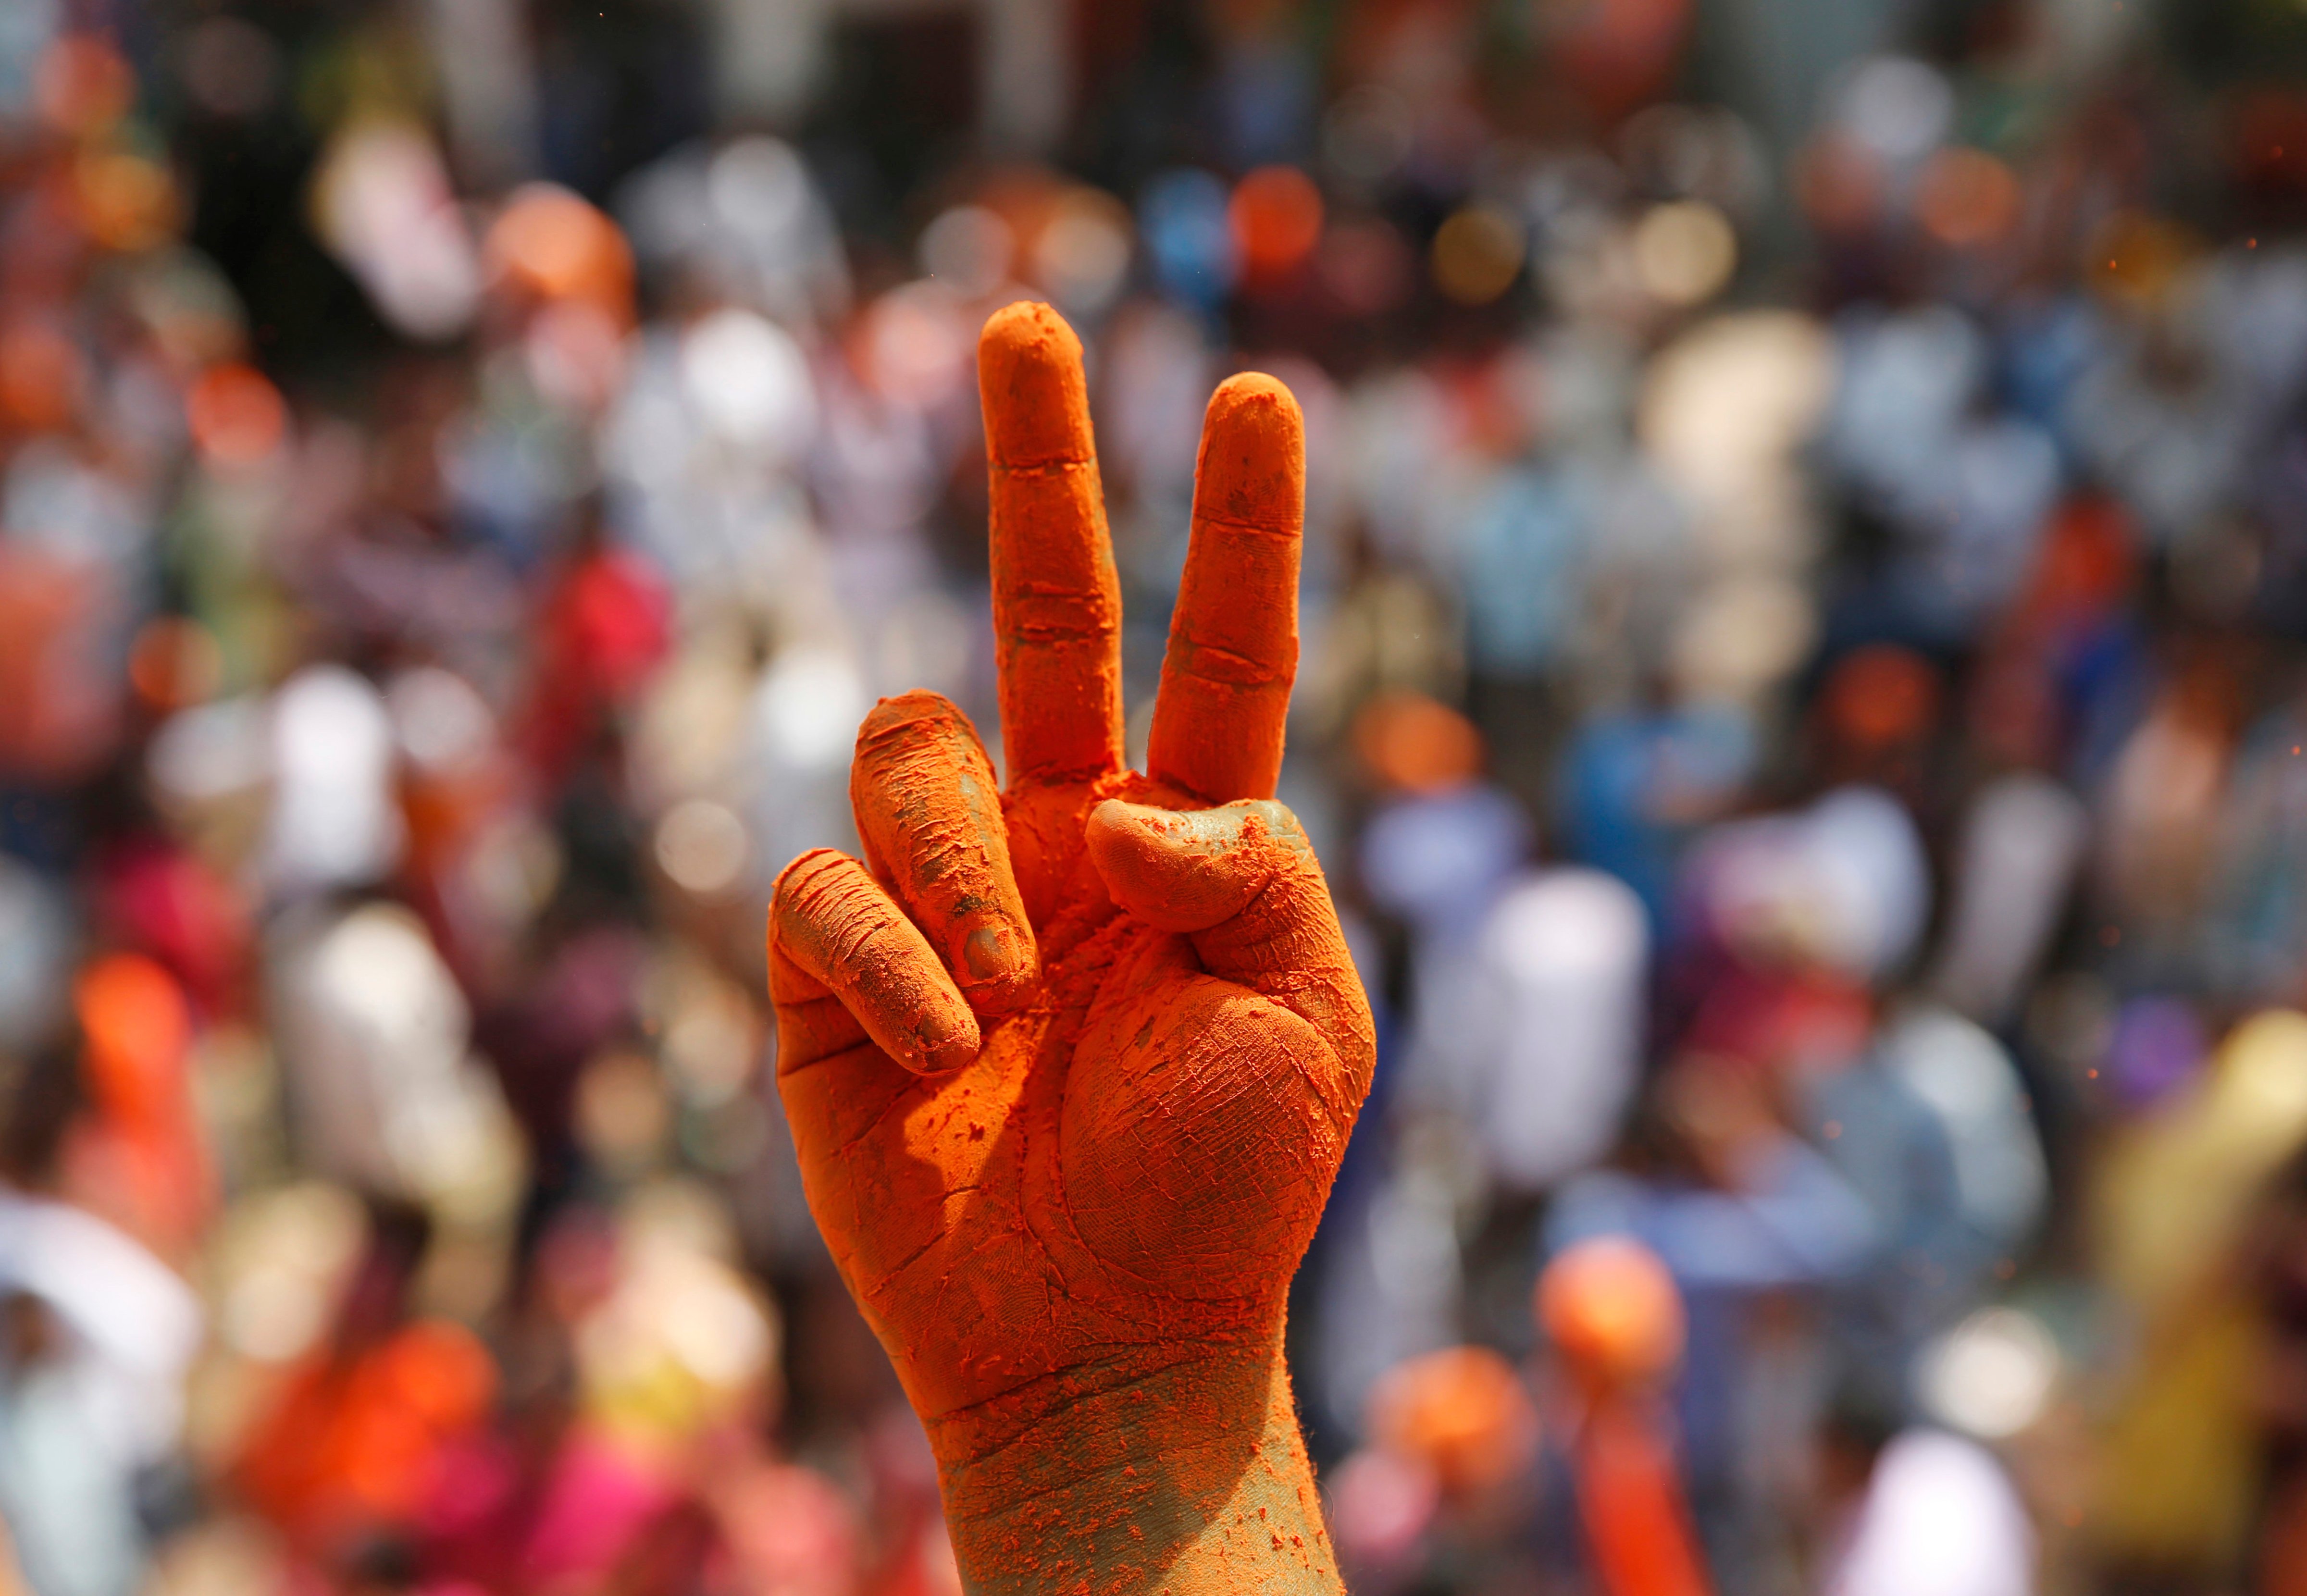 A Bharatiya Janata Party supporter's hands are covered in saffron color as he displays a victory sign in Lucknow, India, on March 11, 2017 (Rajesh Kumar Singh—AP)